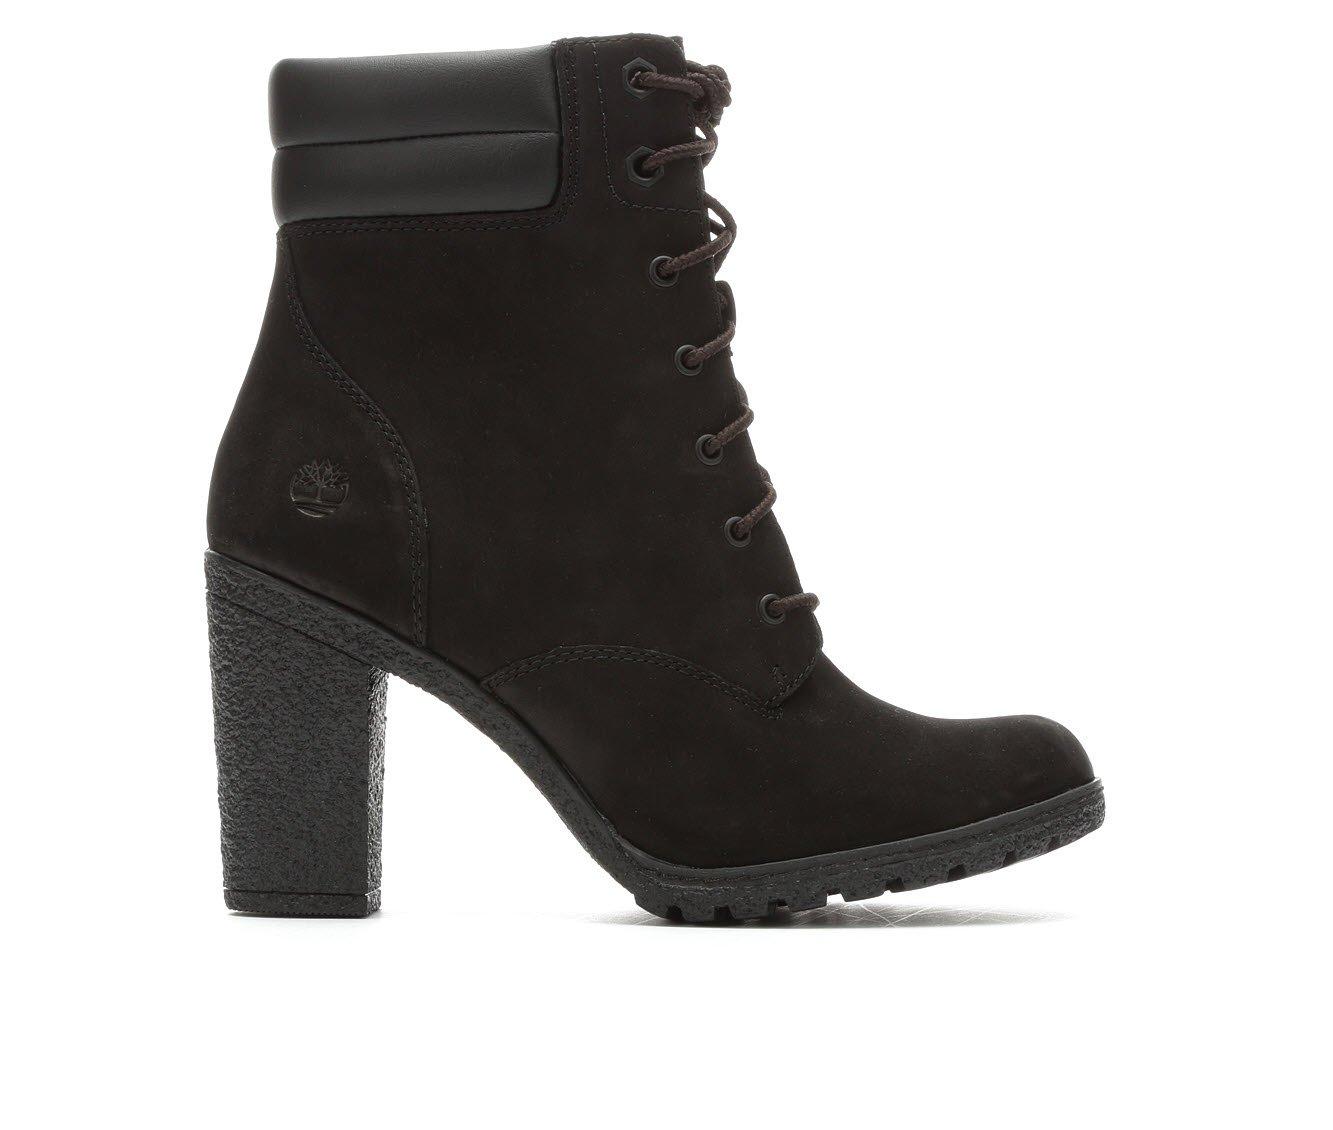 Women's Timberland Shoes & Boots | Shoe